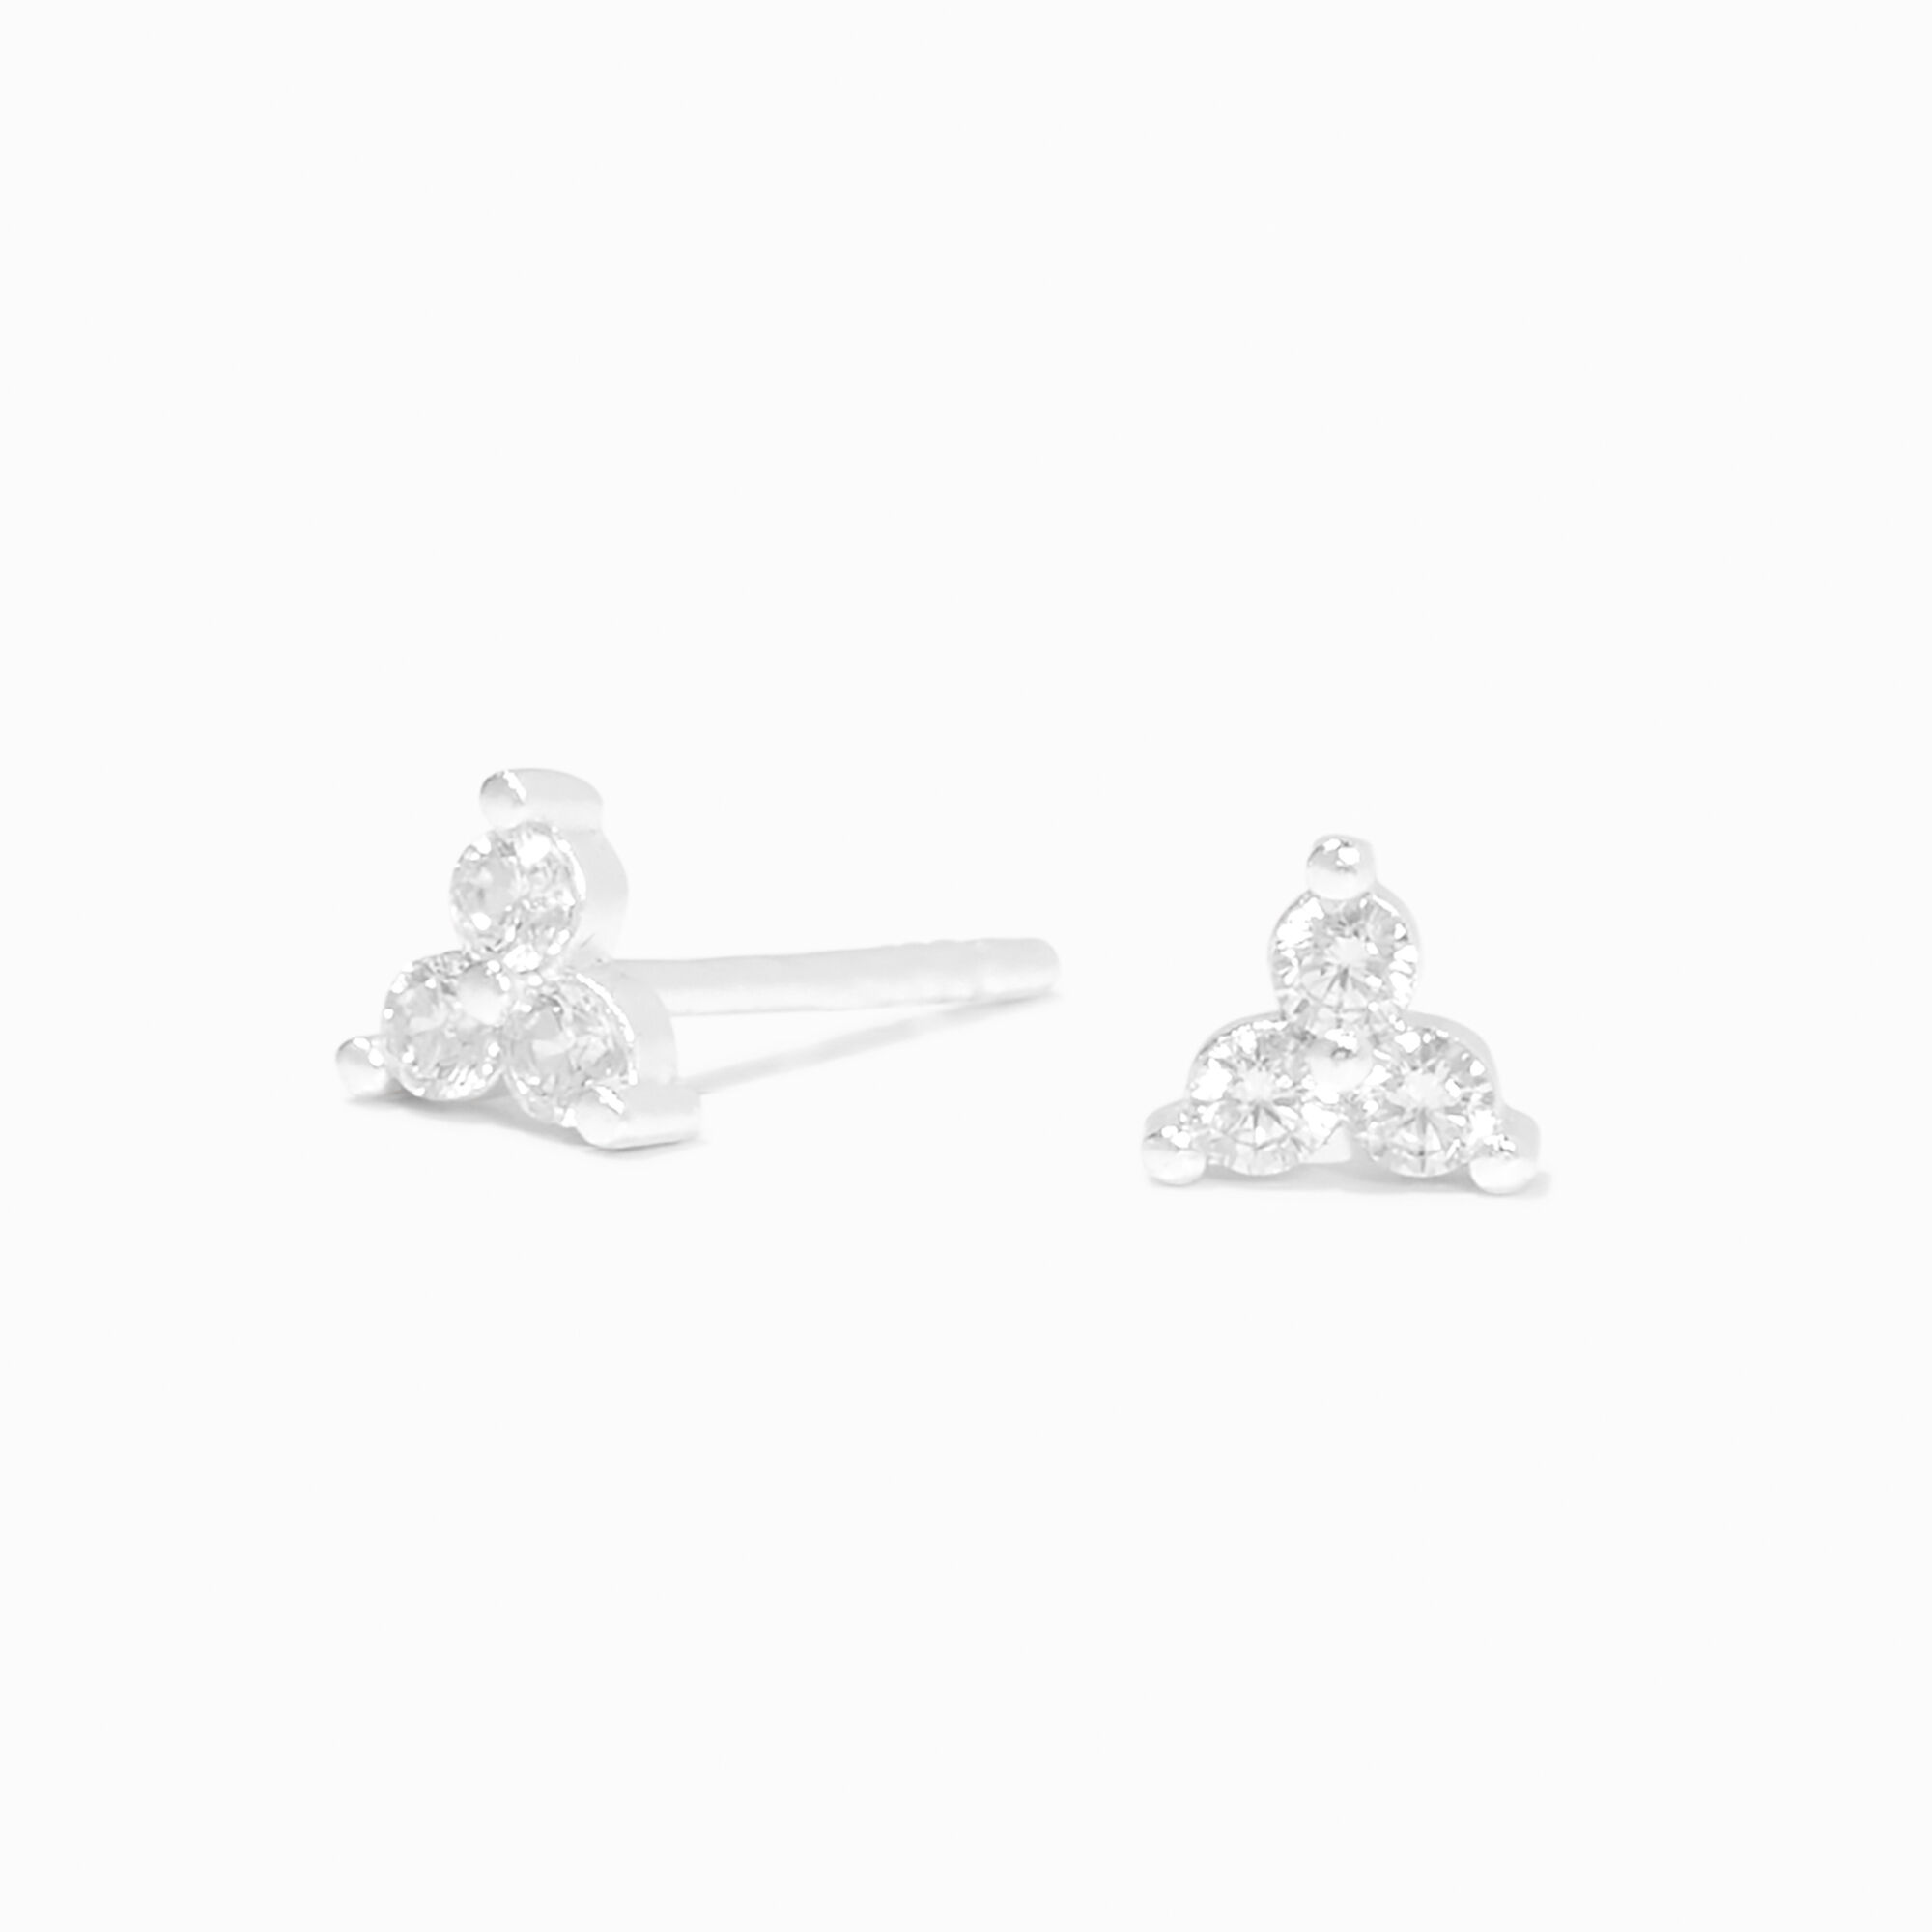 View C Luxe By Claires Cubic Zirconia TriBall Stud Earrings Silver information